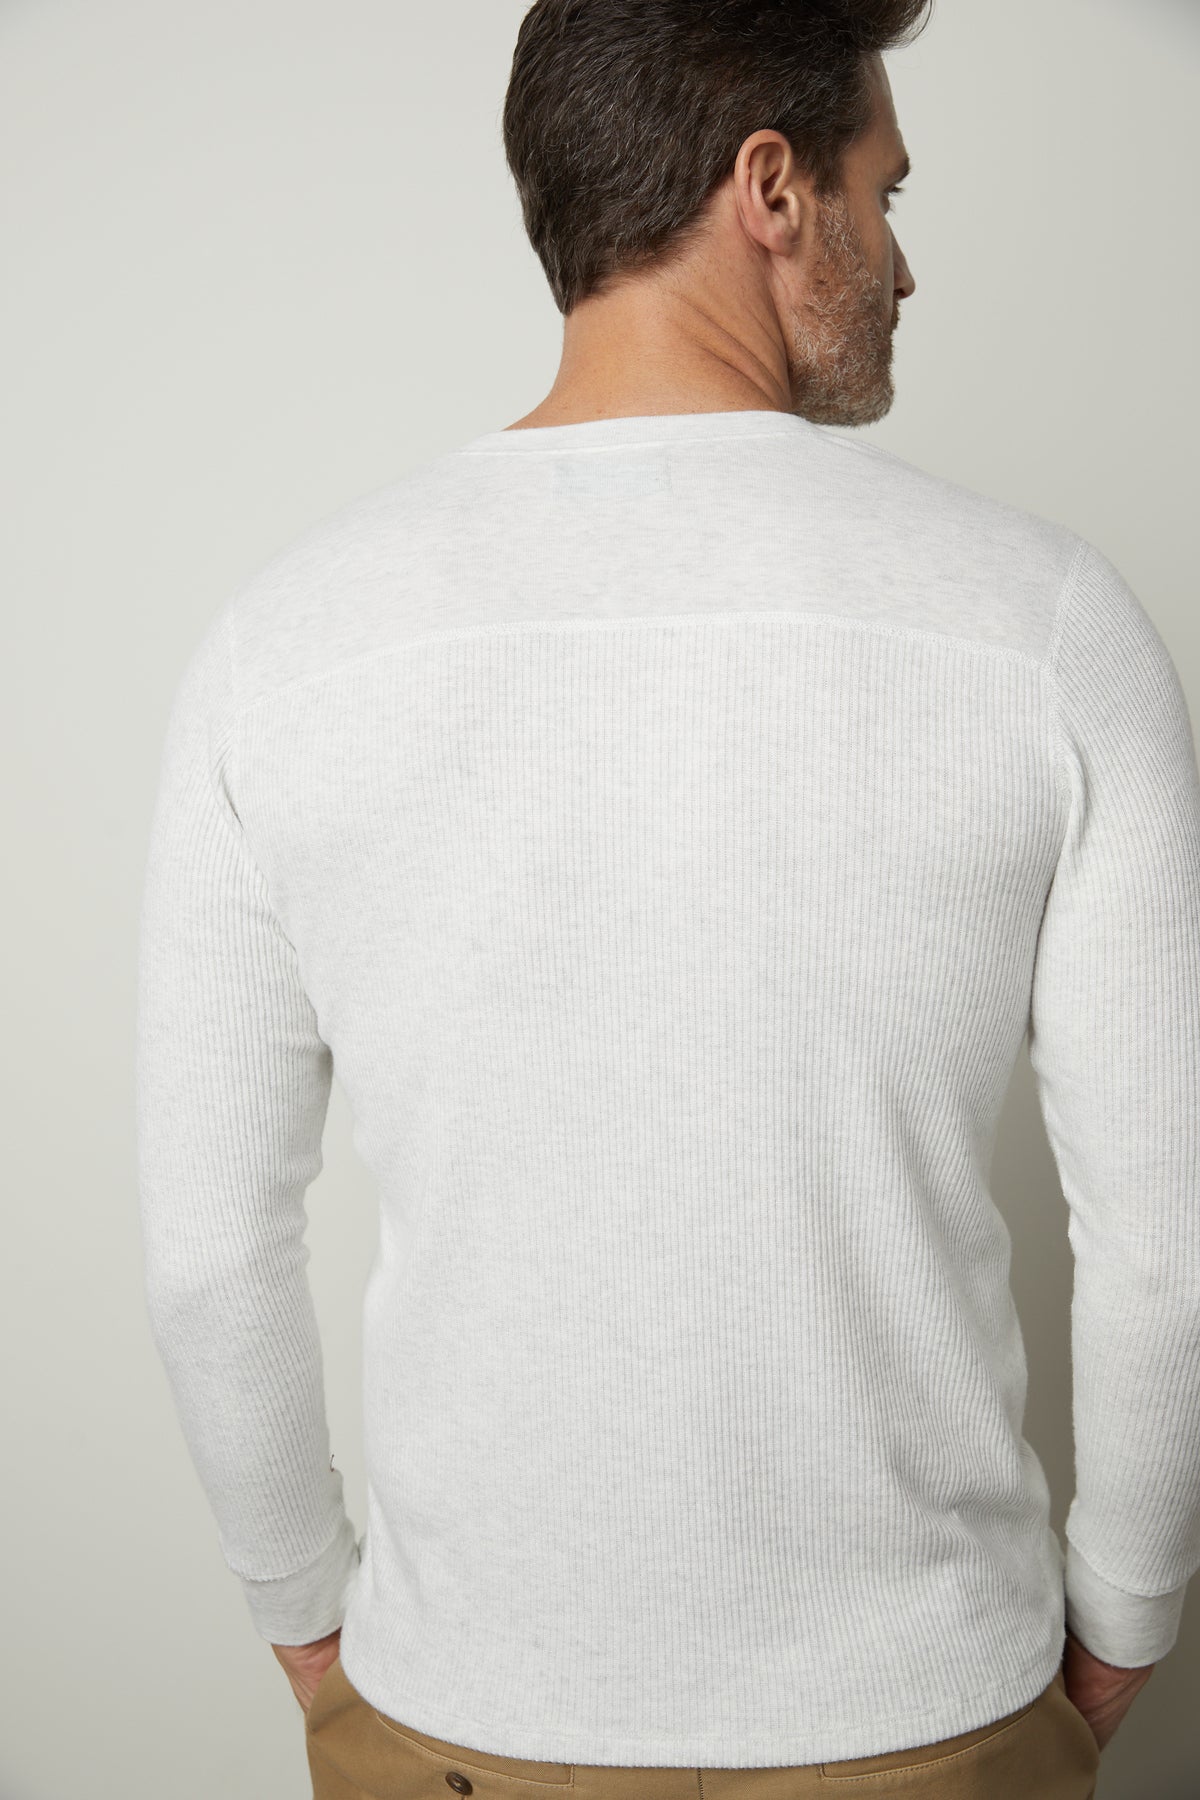 The back view of a man wearing a Velvet by Graham & Spencer Anderson Rib Knit Henley sweater.-35678467326145